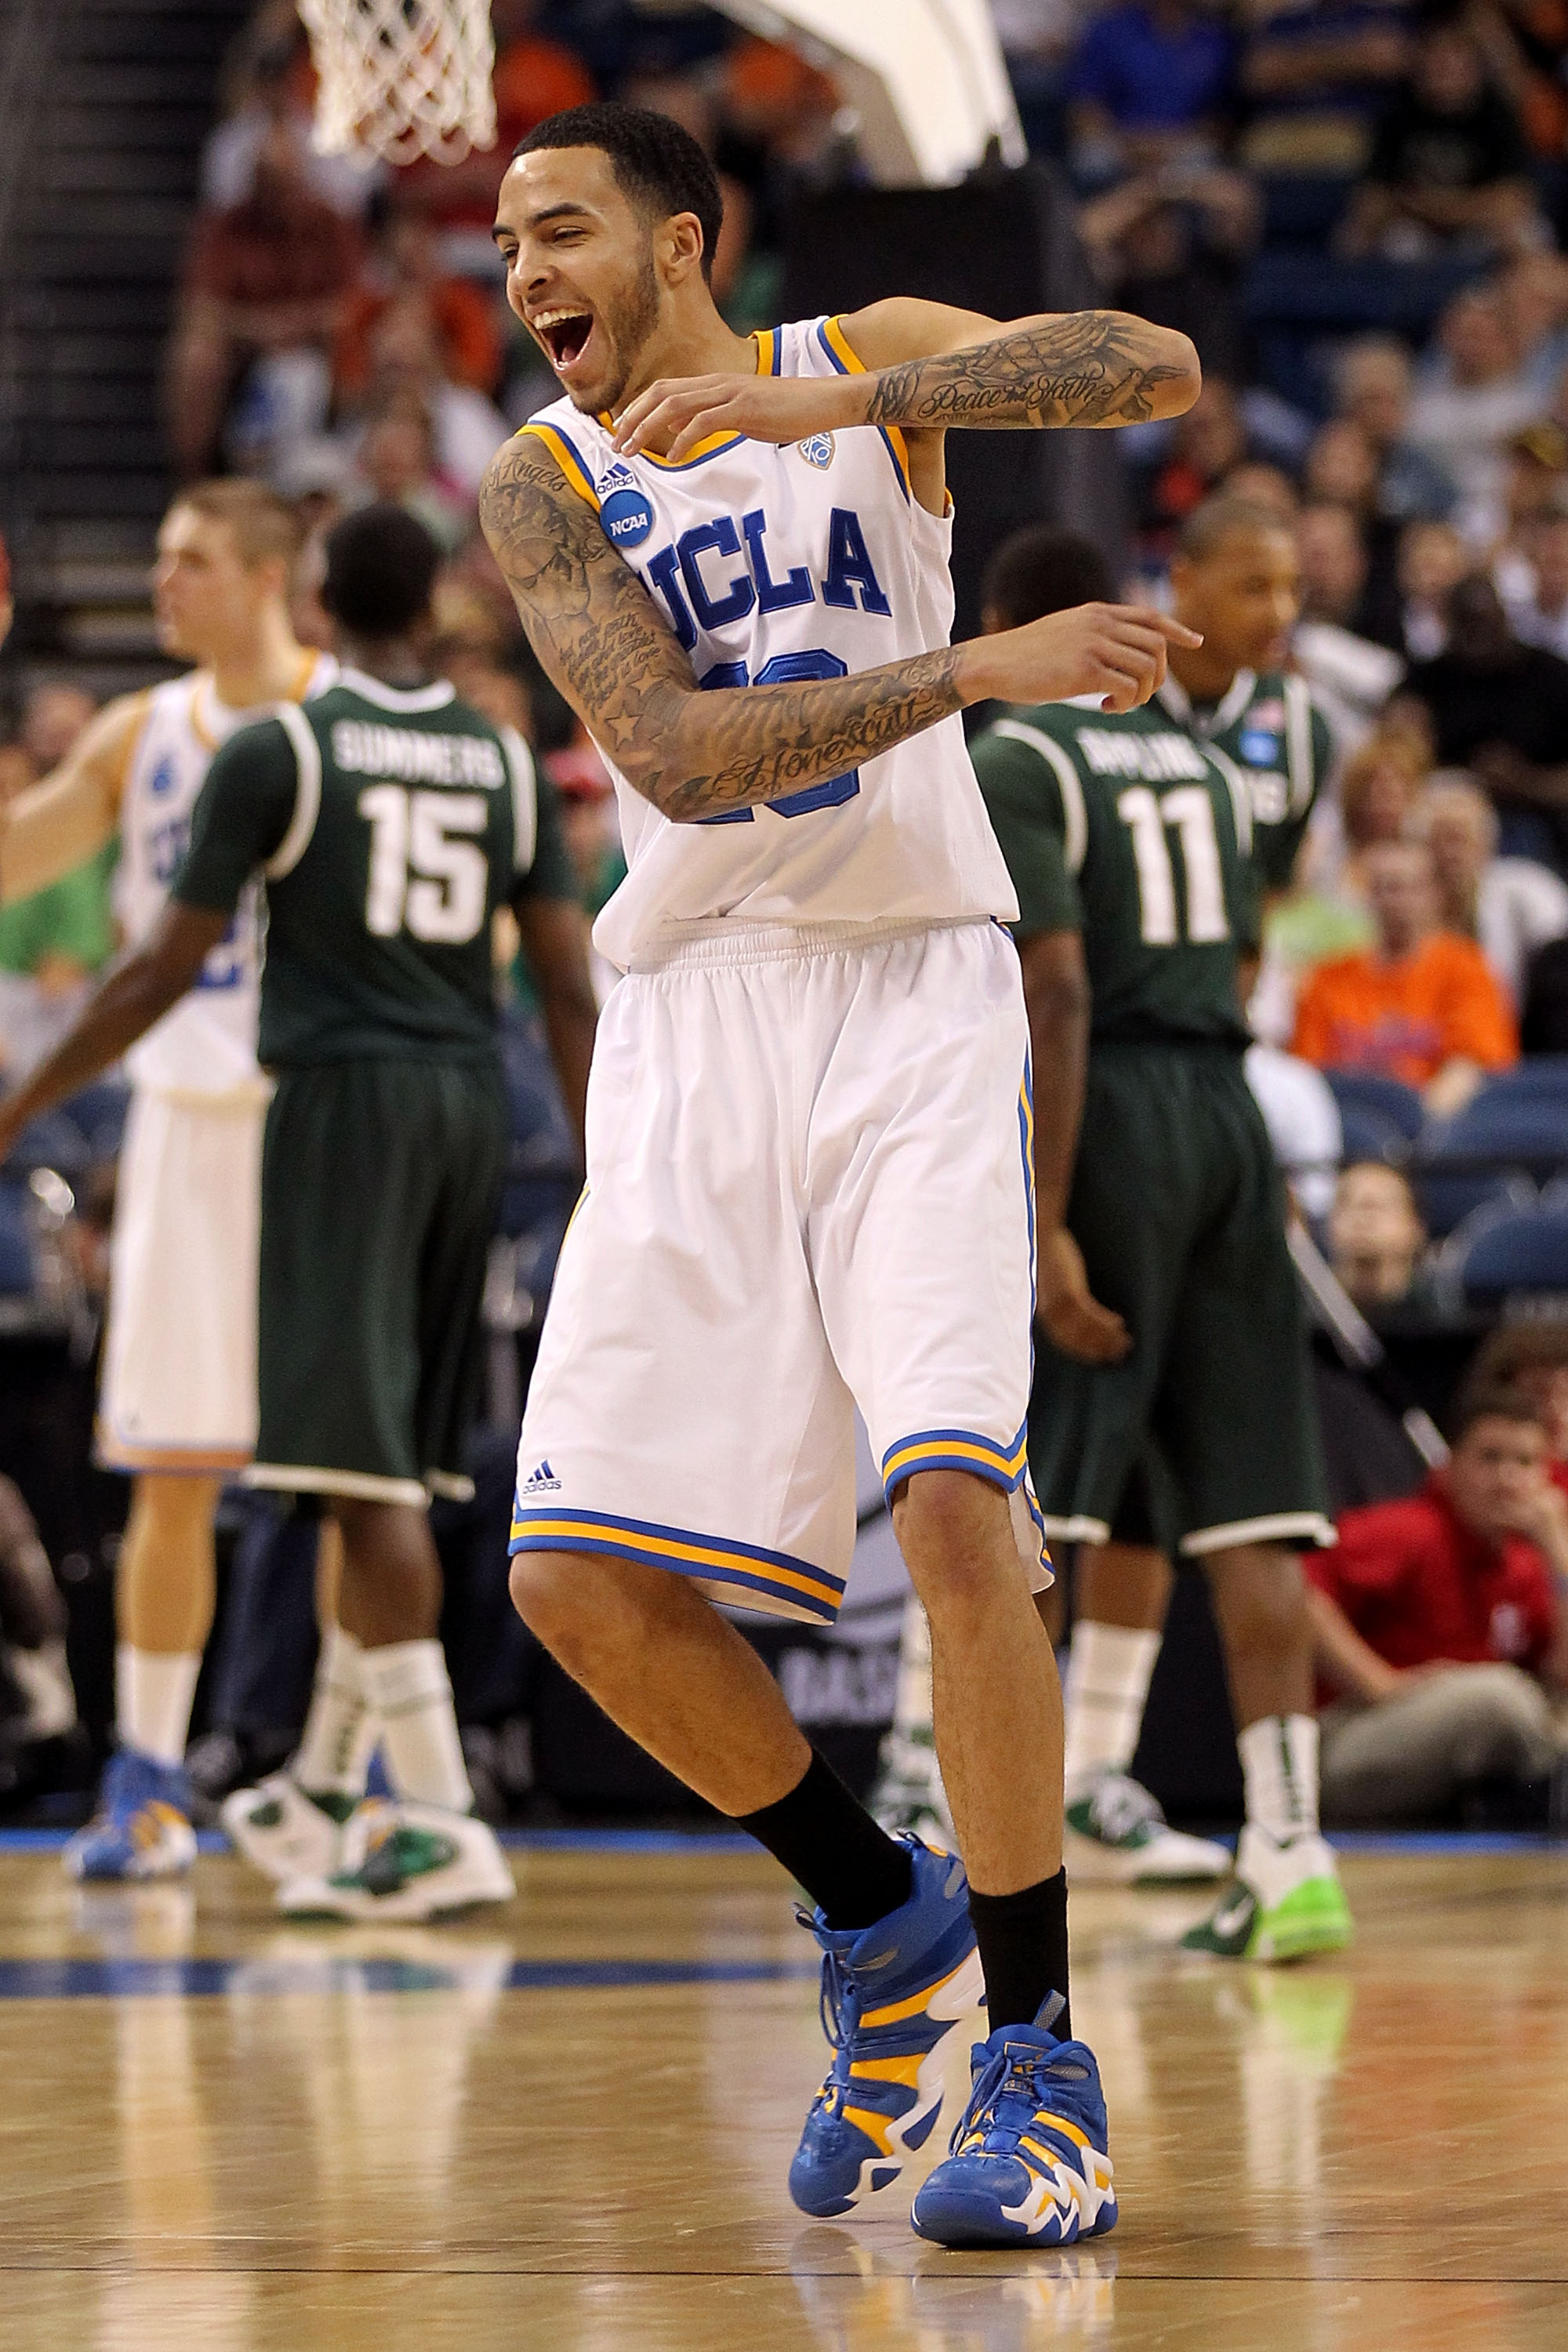 TAMPA, FL - MARCH 17:  Tyler Honeycutt #23 of the UCLA Bruins reacts in the first half against the Michigan State Spartans during the second round of the 2011 NCAA men's basketball tournament at St. Pete Times Forum on March 17, 2011 in Tampa, Florida.  (